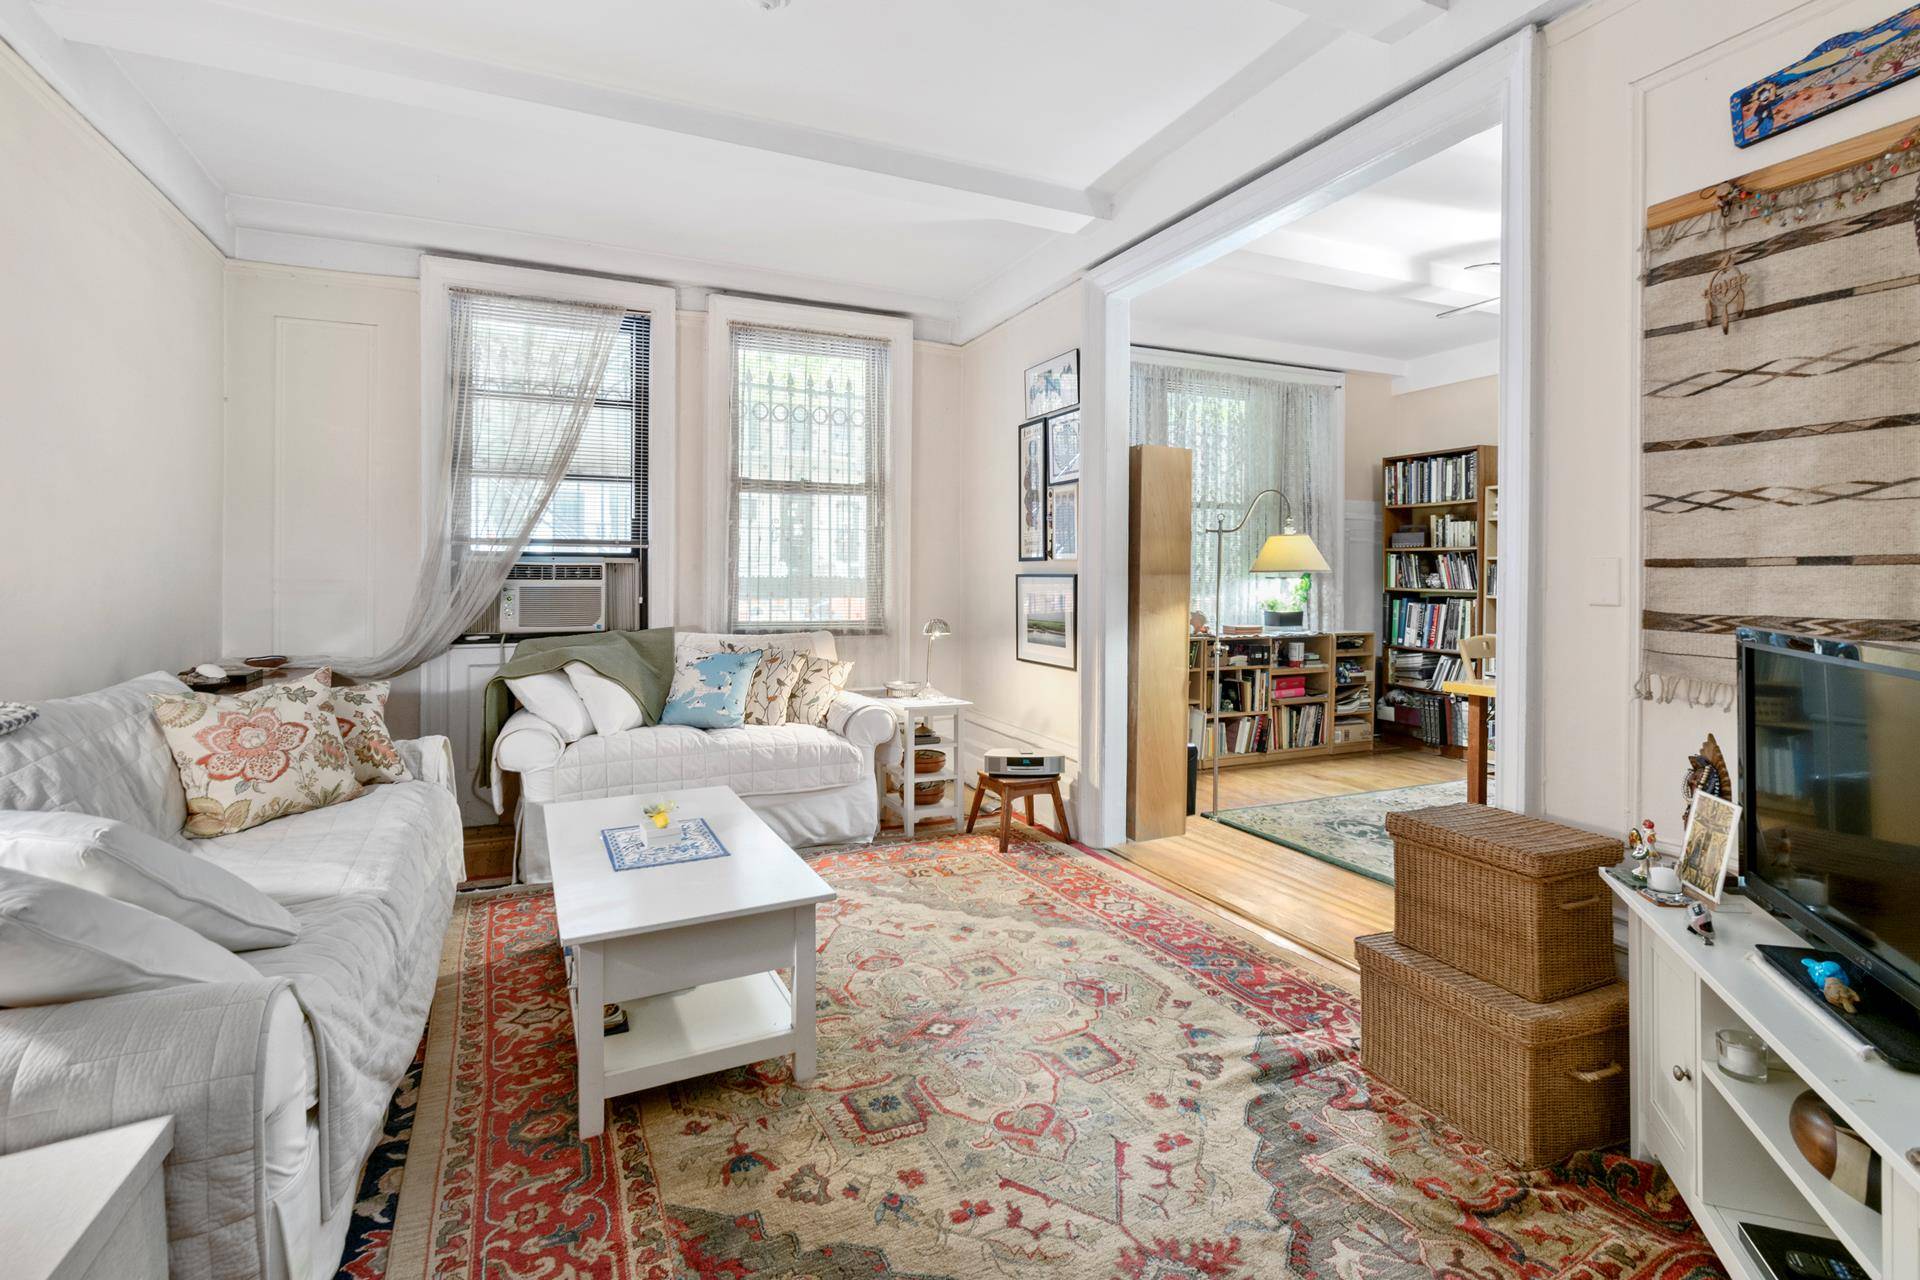 Gorgeous and oversized 2 Bedroom with a formal Dining Room located on a Riverside Park block along the Columbia University corridor.